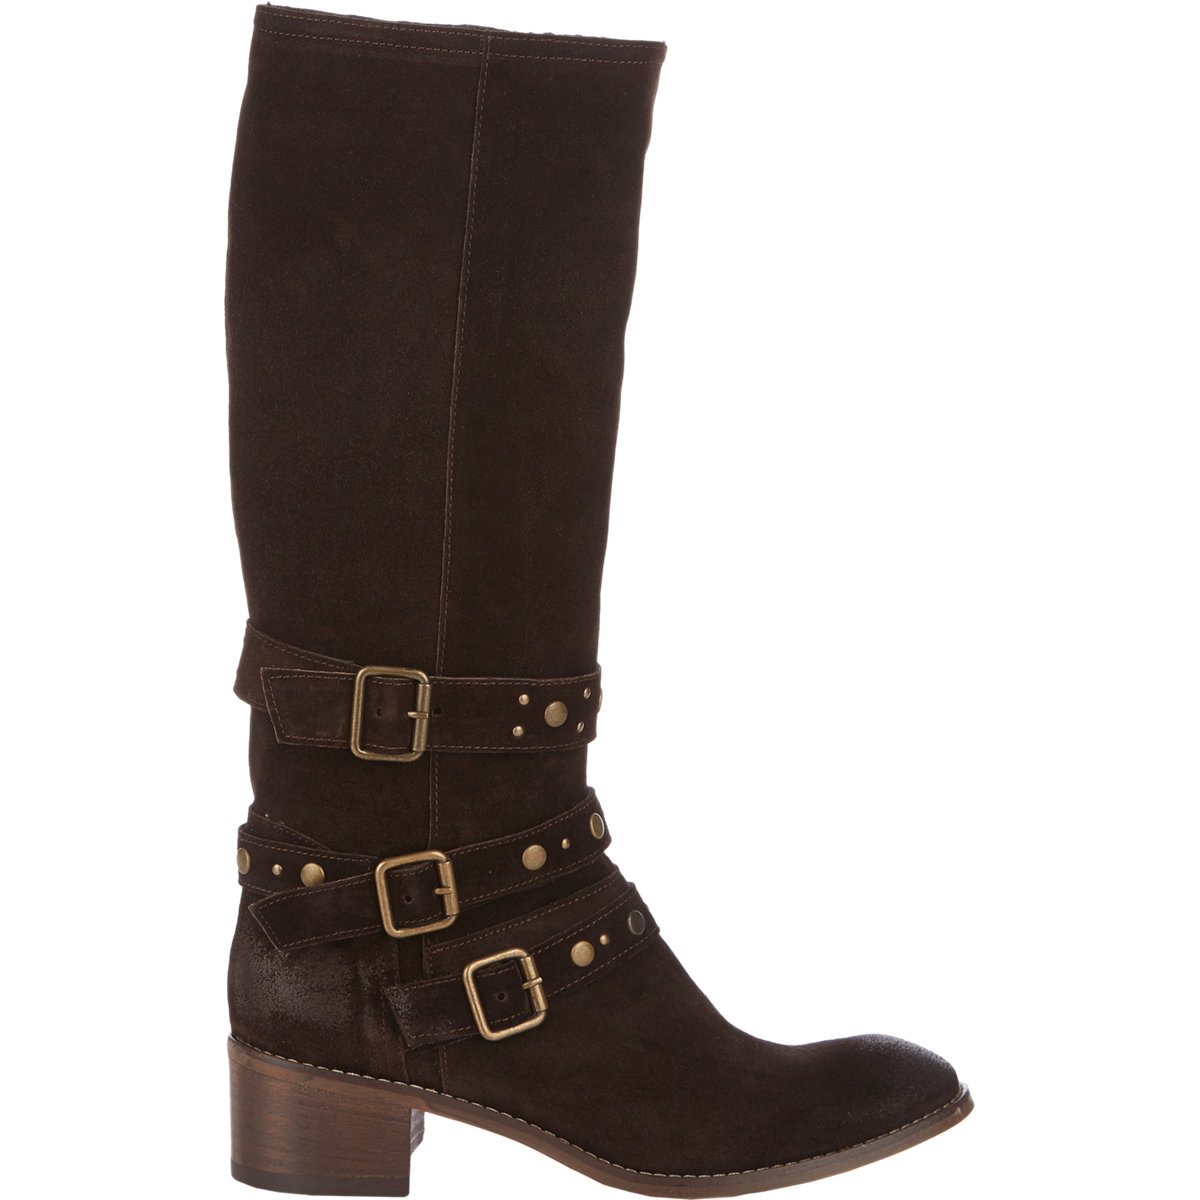 Brown studded boots